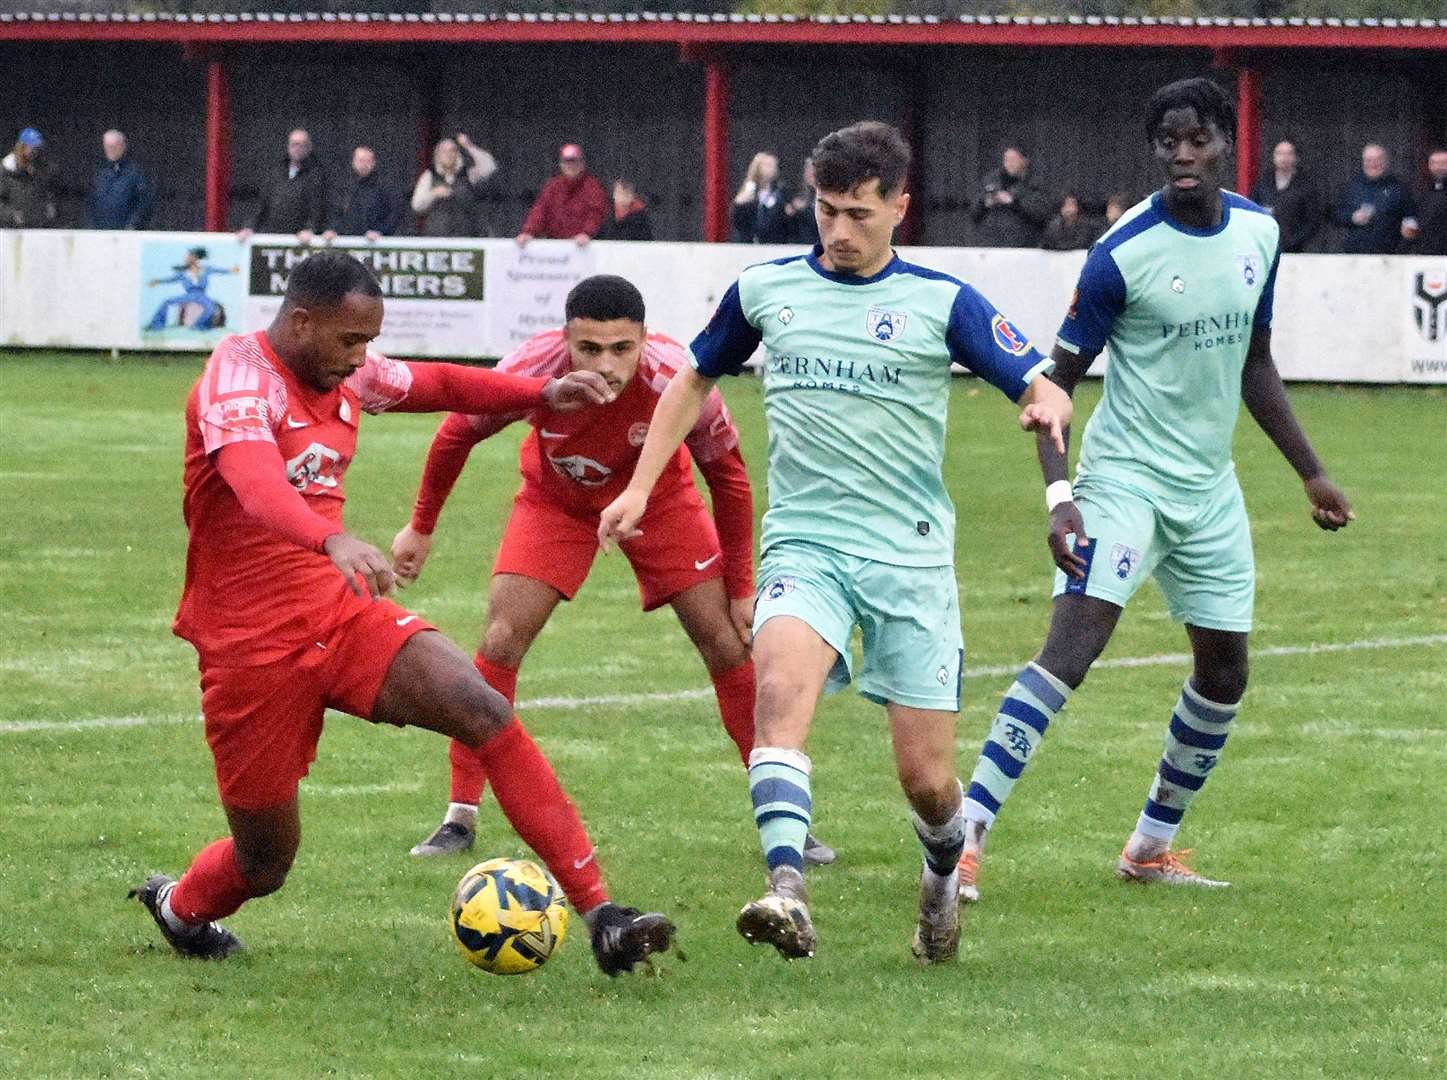 Hythe beat Tonbridge on penalties in the FA Trophy on Saturday. Picture: Randolph File